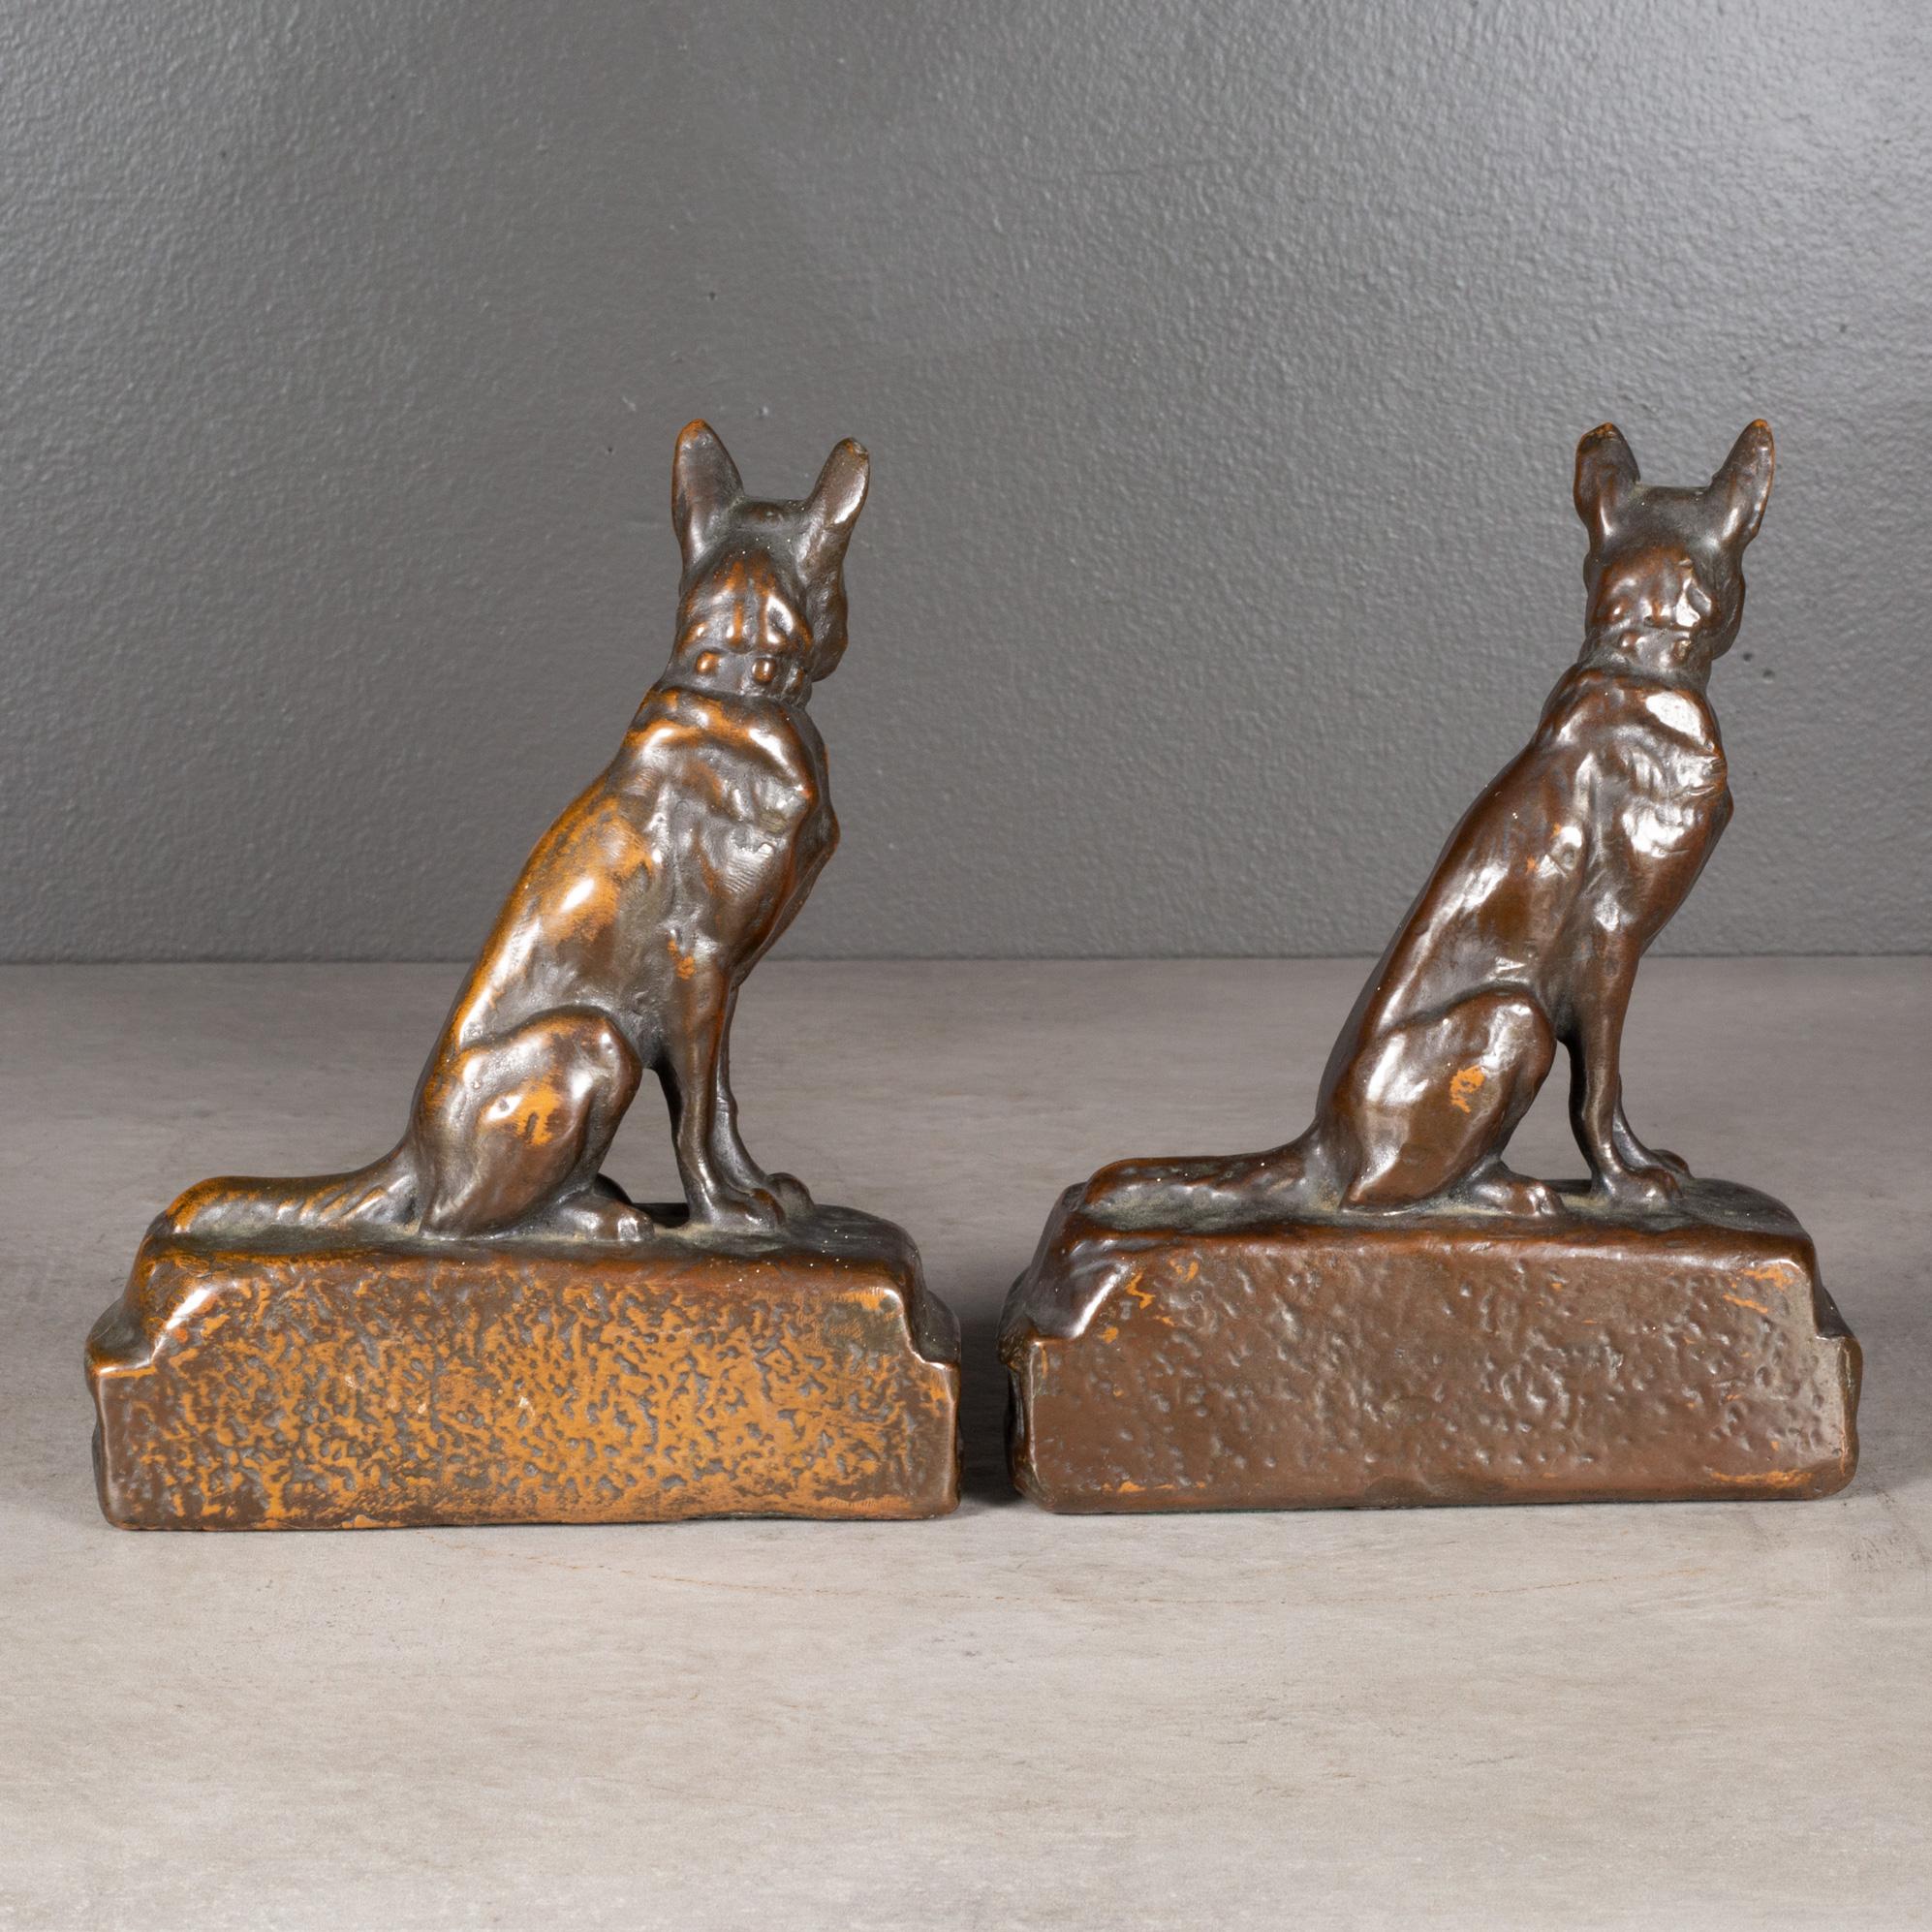 American Bronze Cast German Shepherd Bookends by Armor Bronze, C.1930 (FREE SHIPPING) For Sale